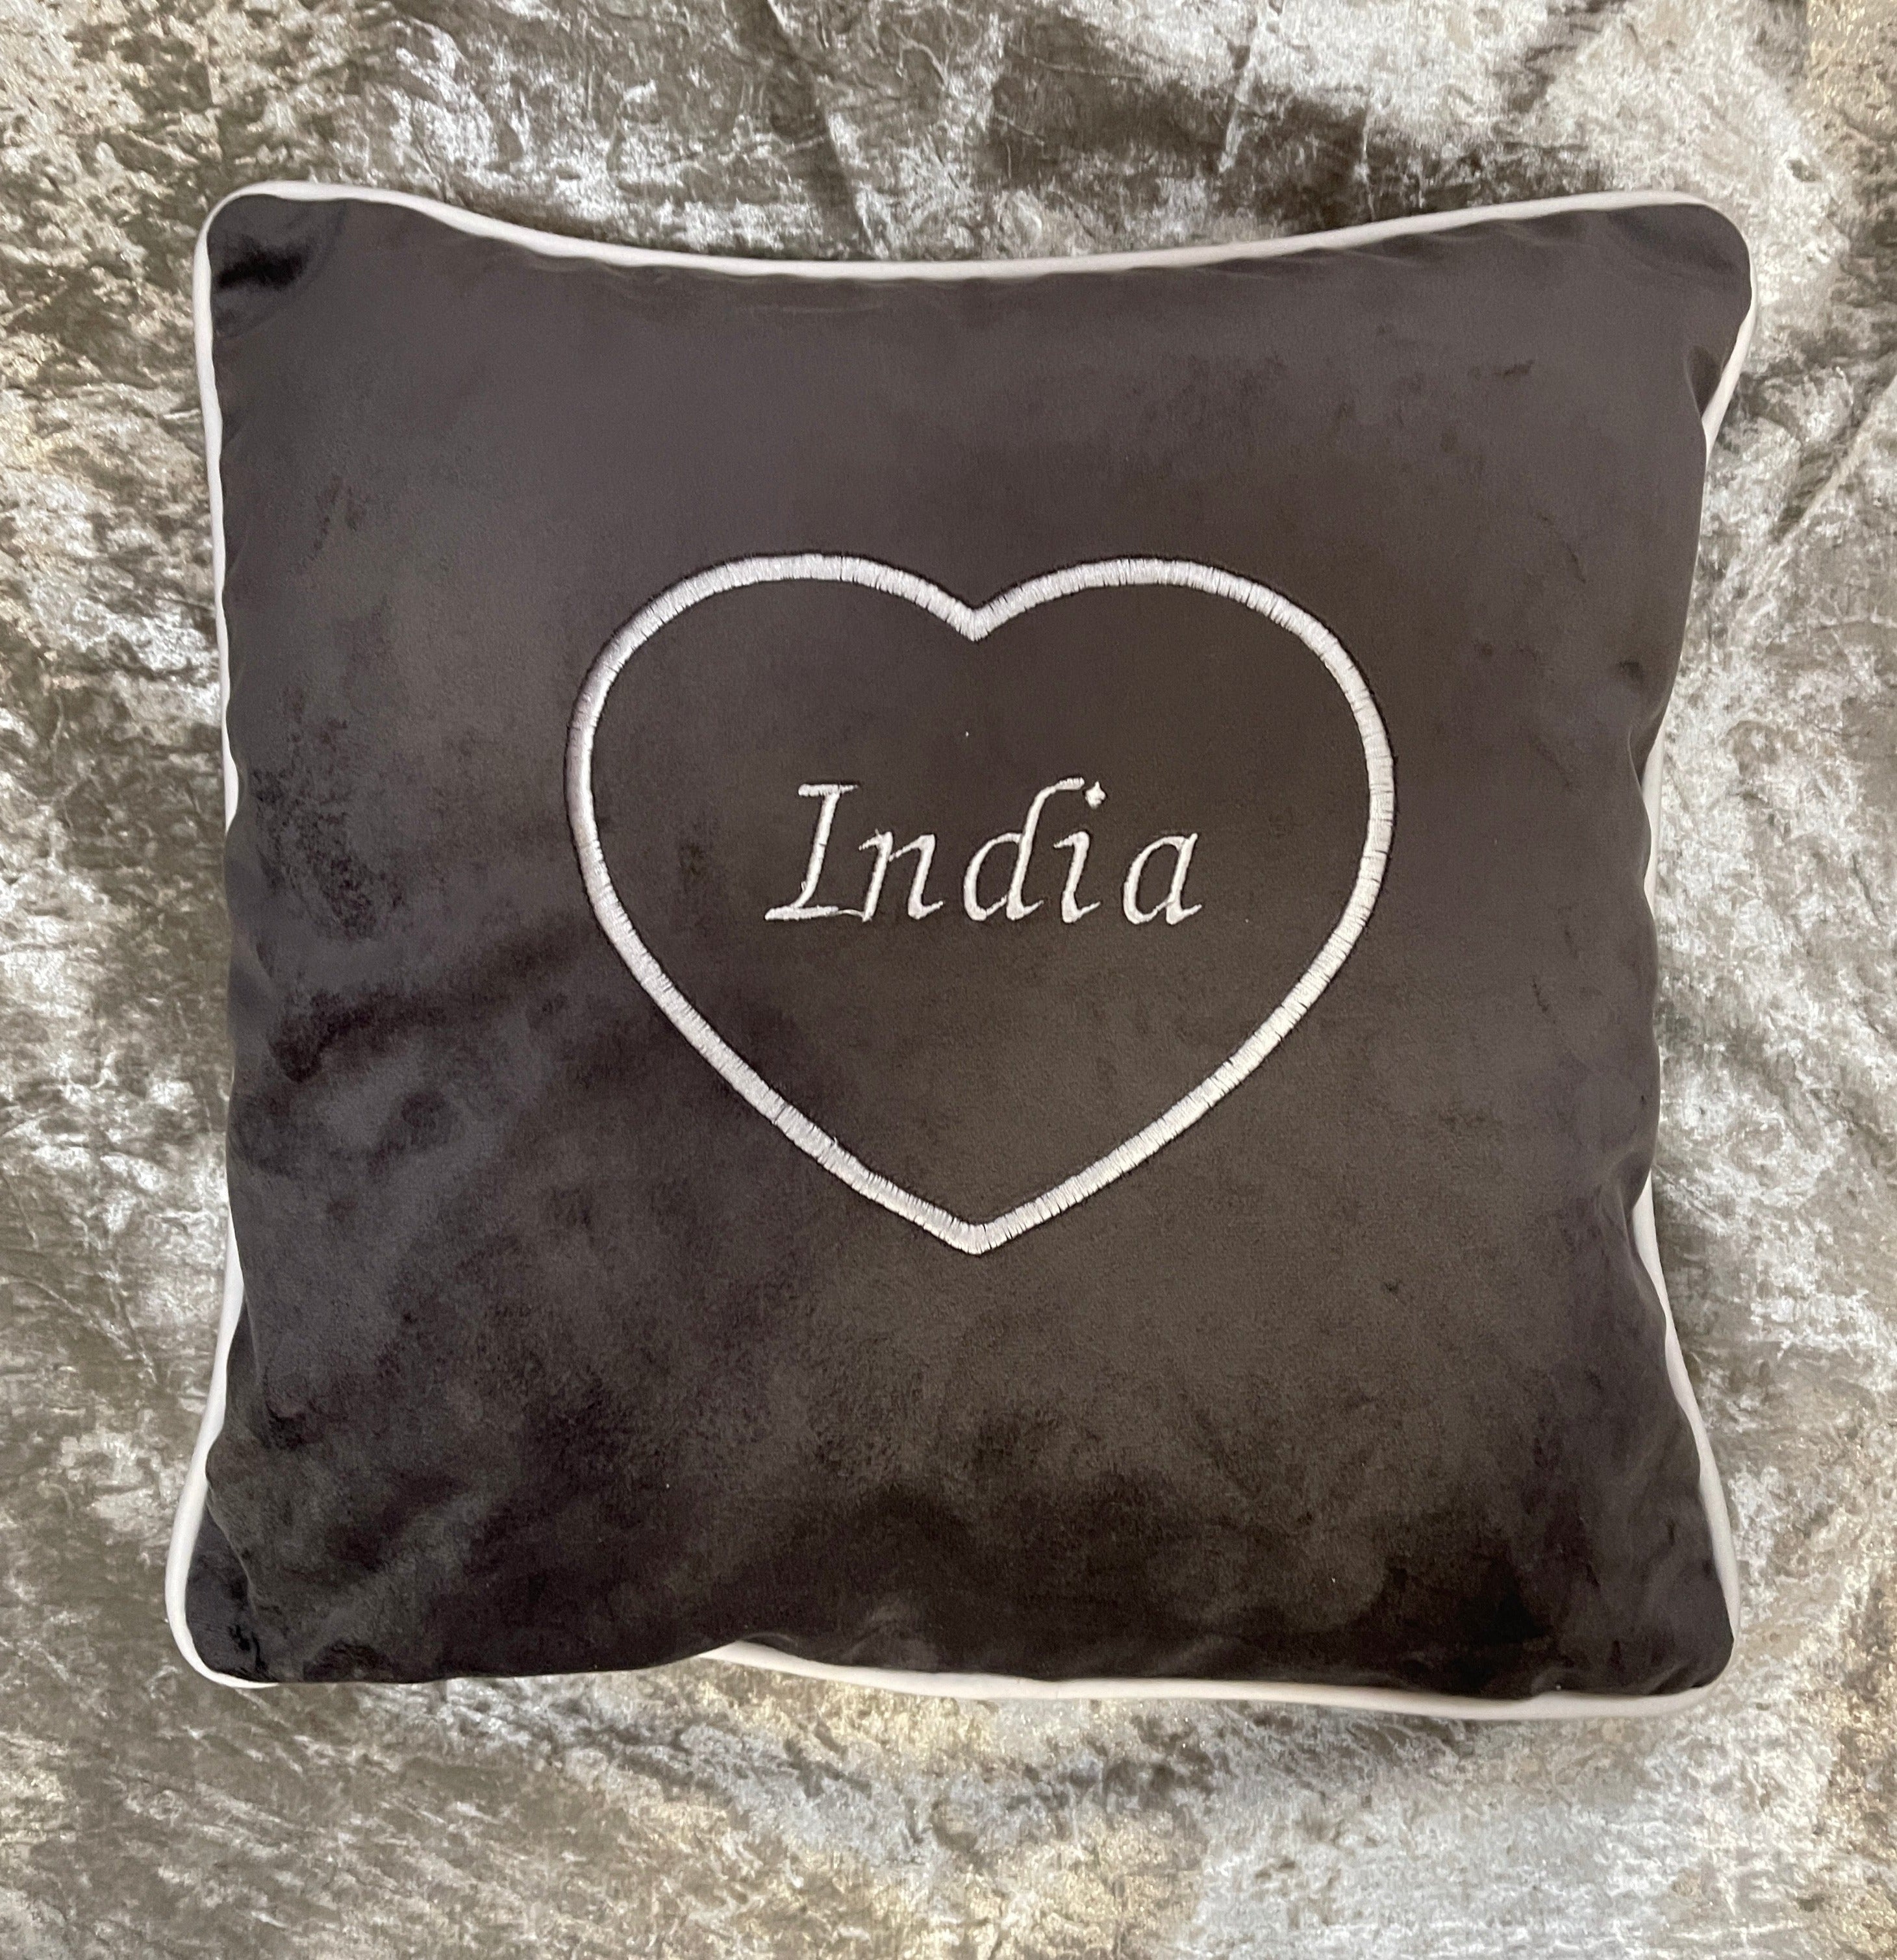 Personalised Cushion for Dog or Cat - Heart design grey with white text